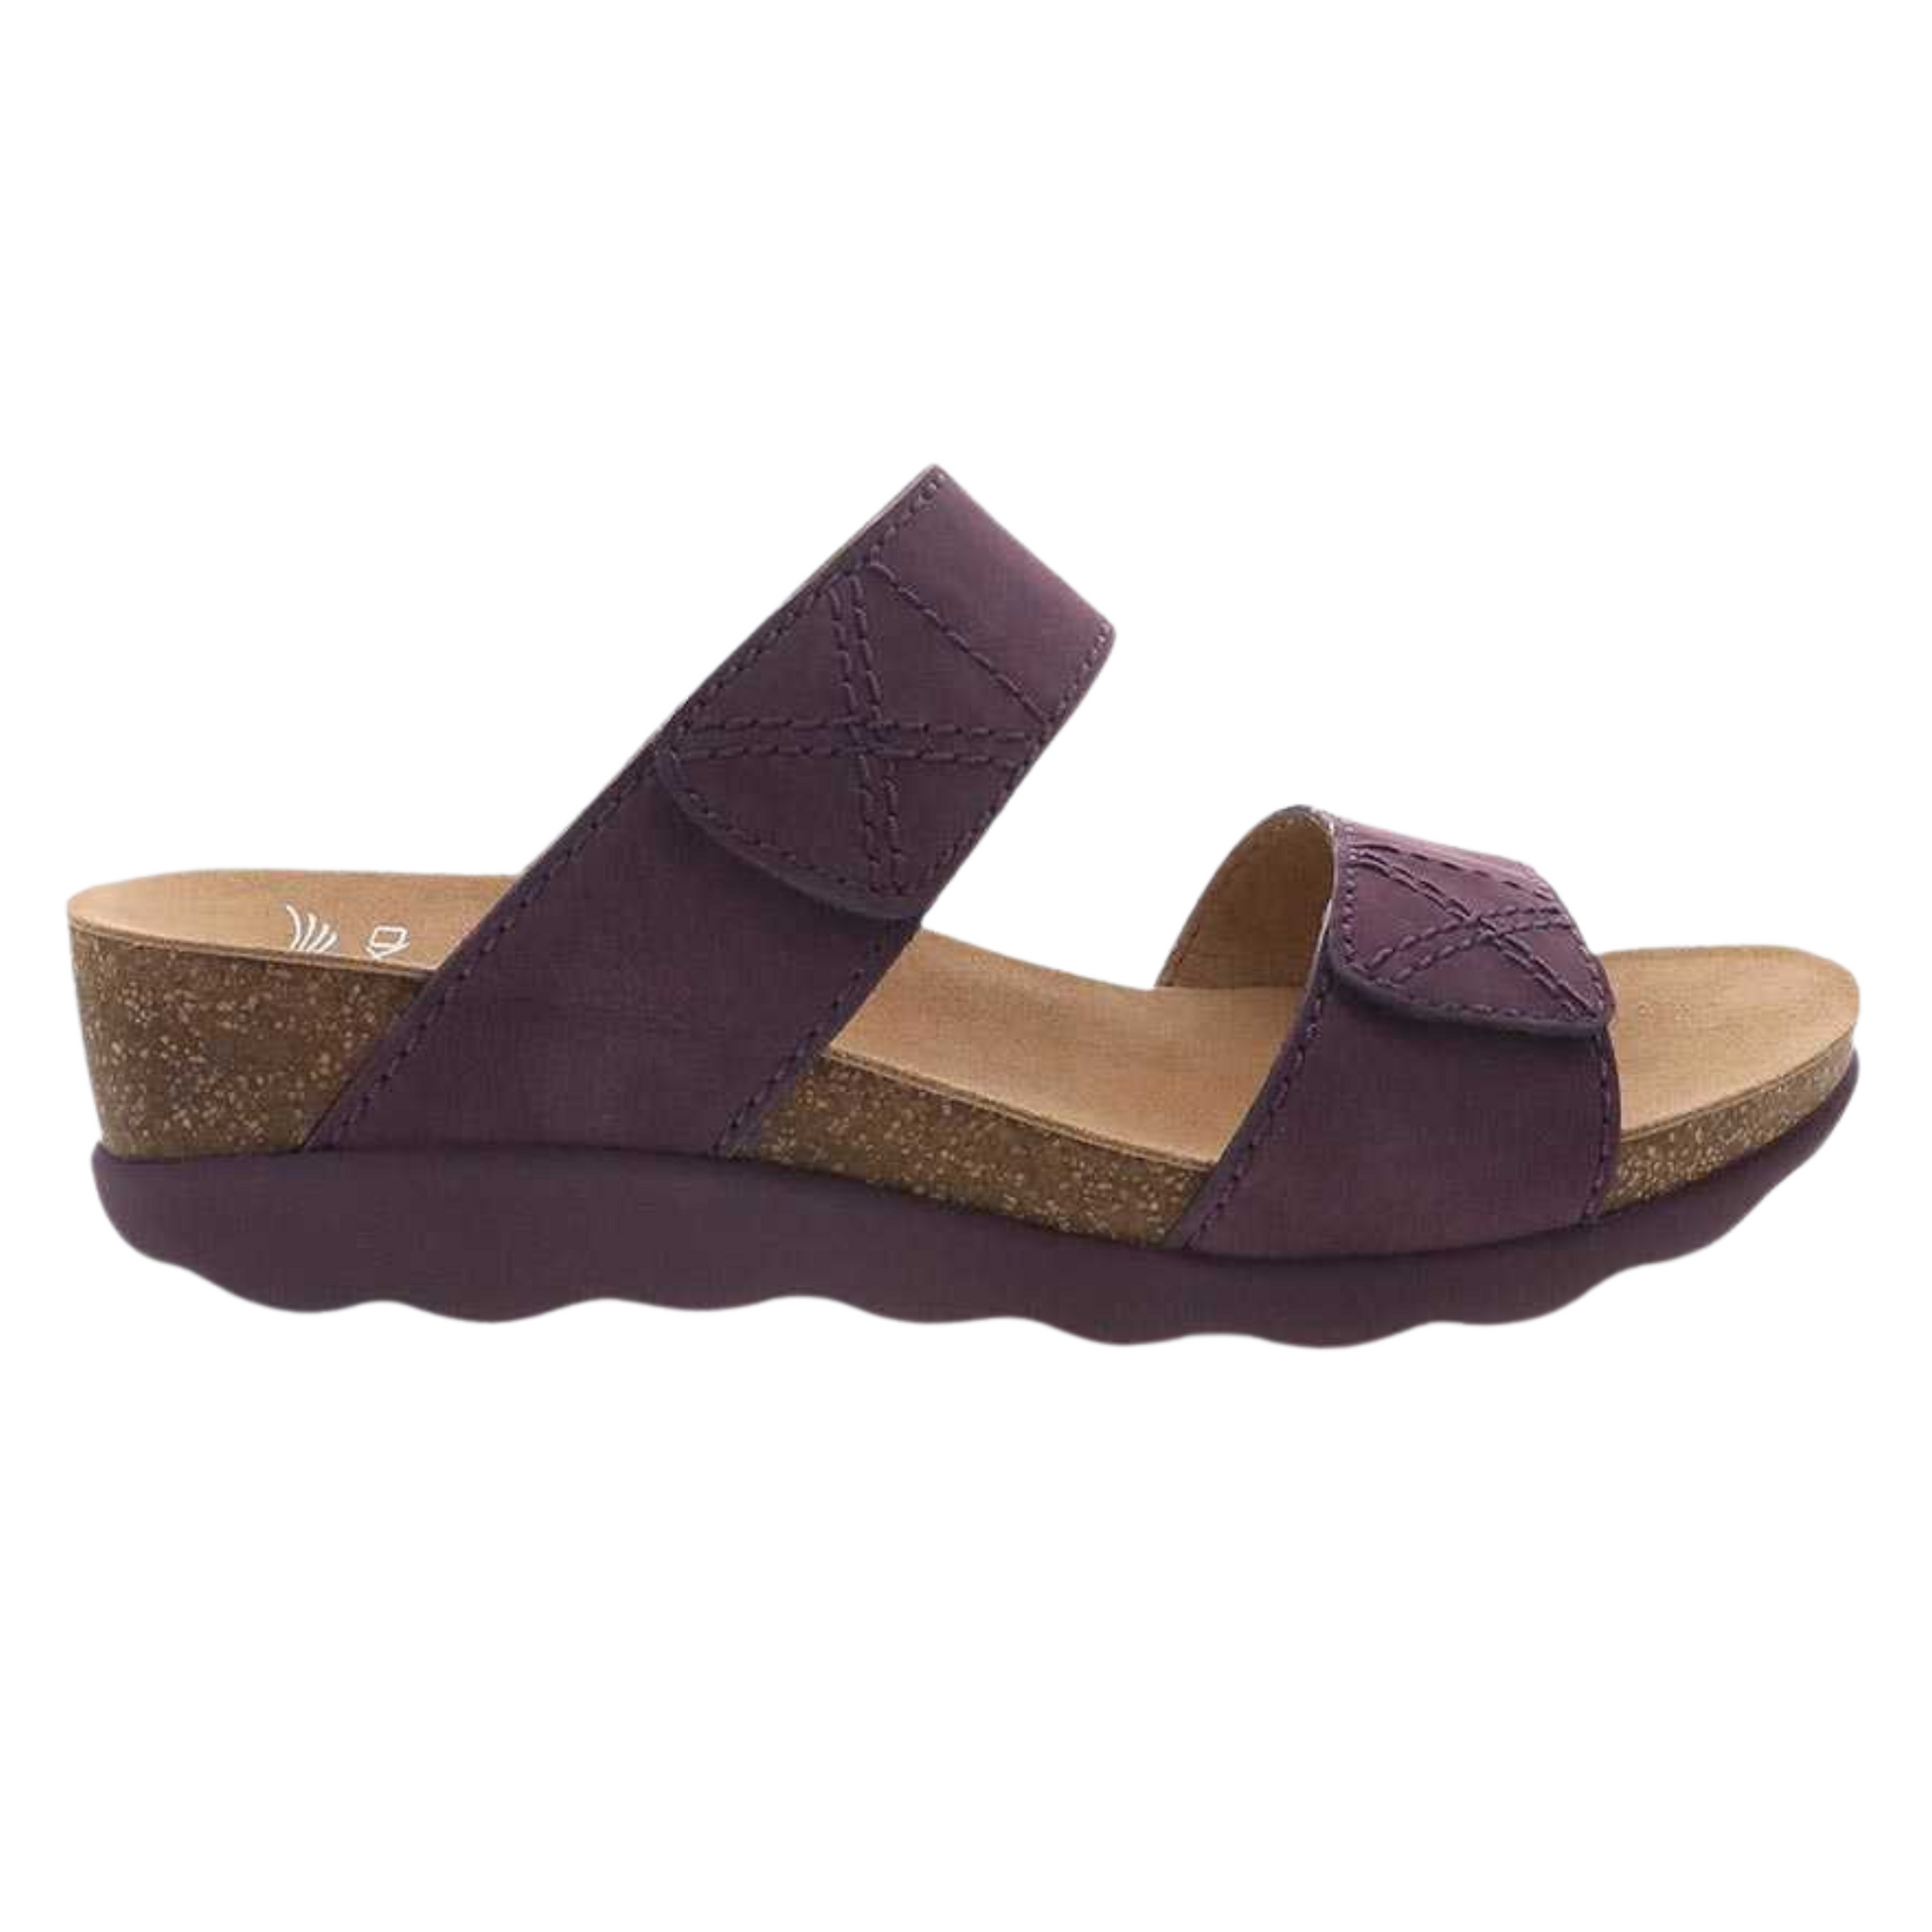 A purple sandal is pictured in profile with a curvy outsole, two leather straps, and cork midsole.